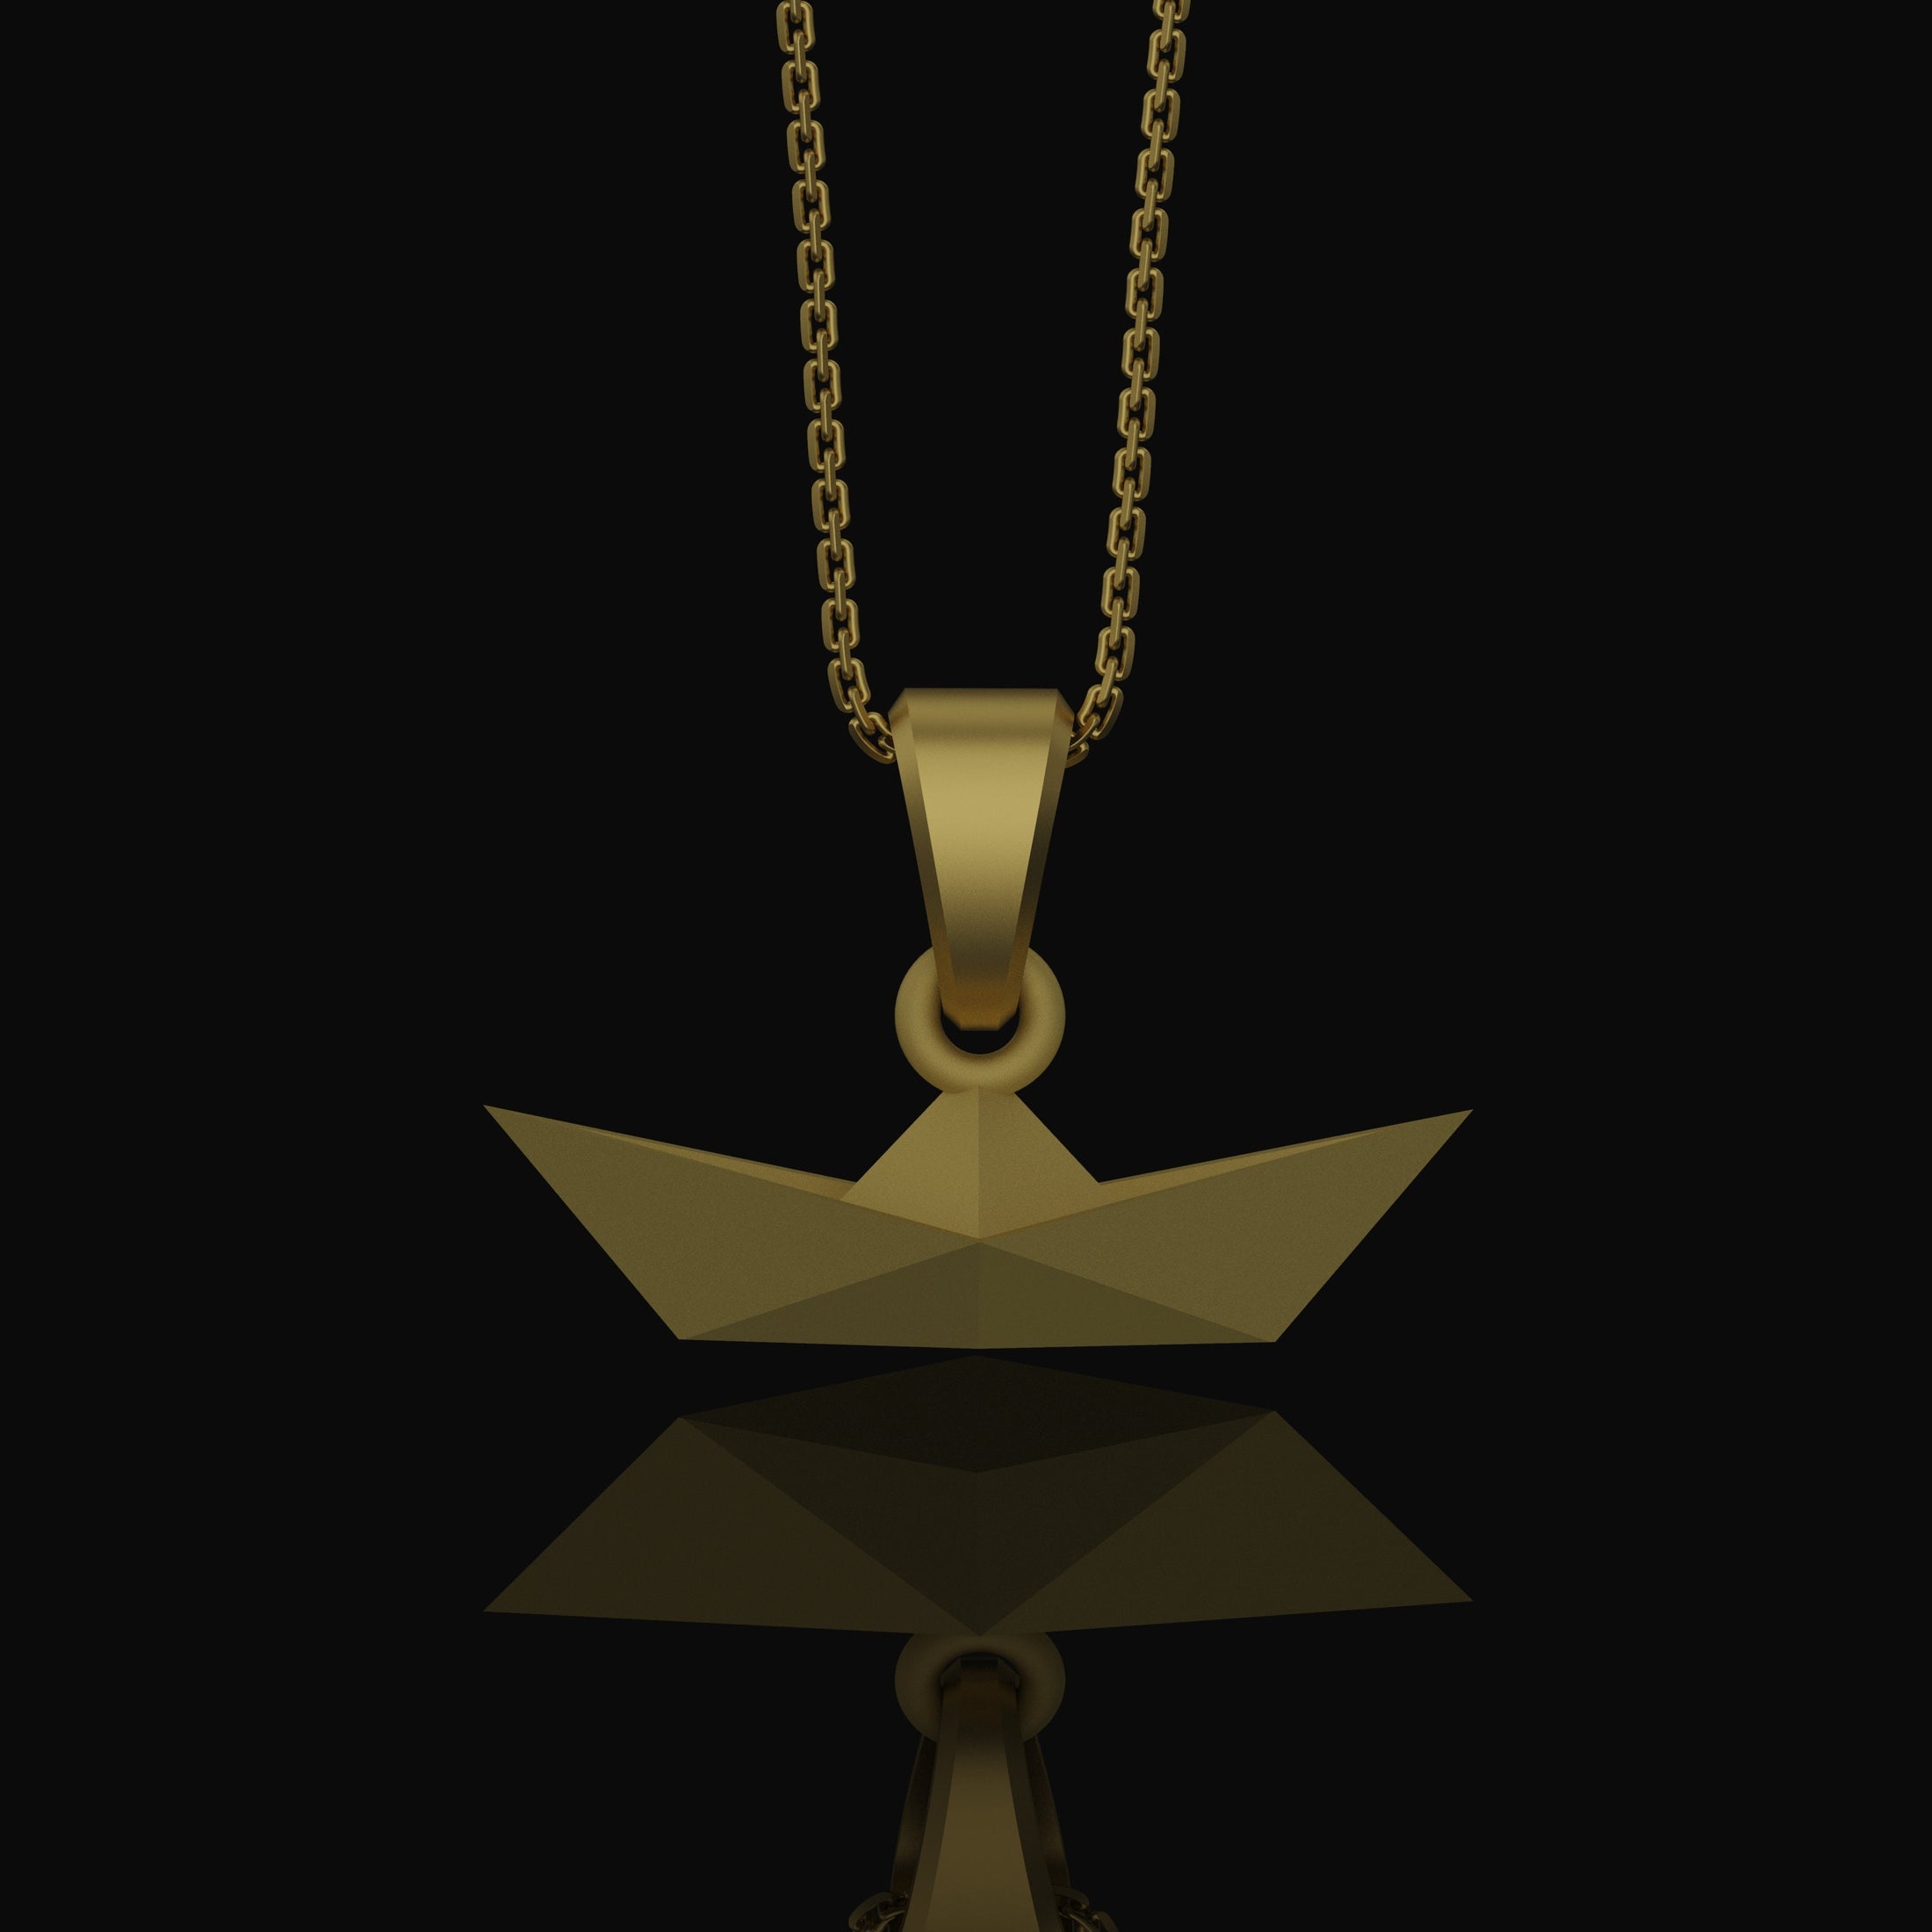 Origami Boat Pendant - Chic Geometrical Silver Necklace, Elegant Folded Boat Design, Perfect Gift for Origami Lovers